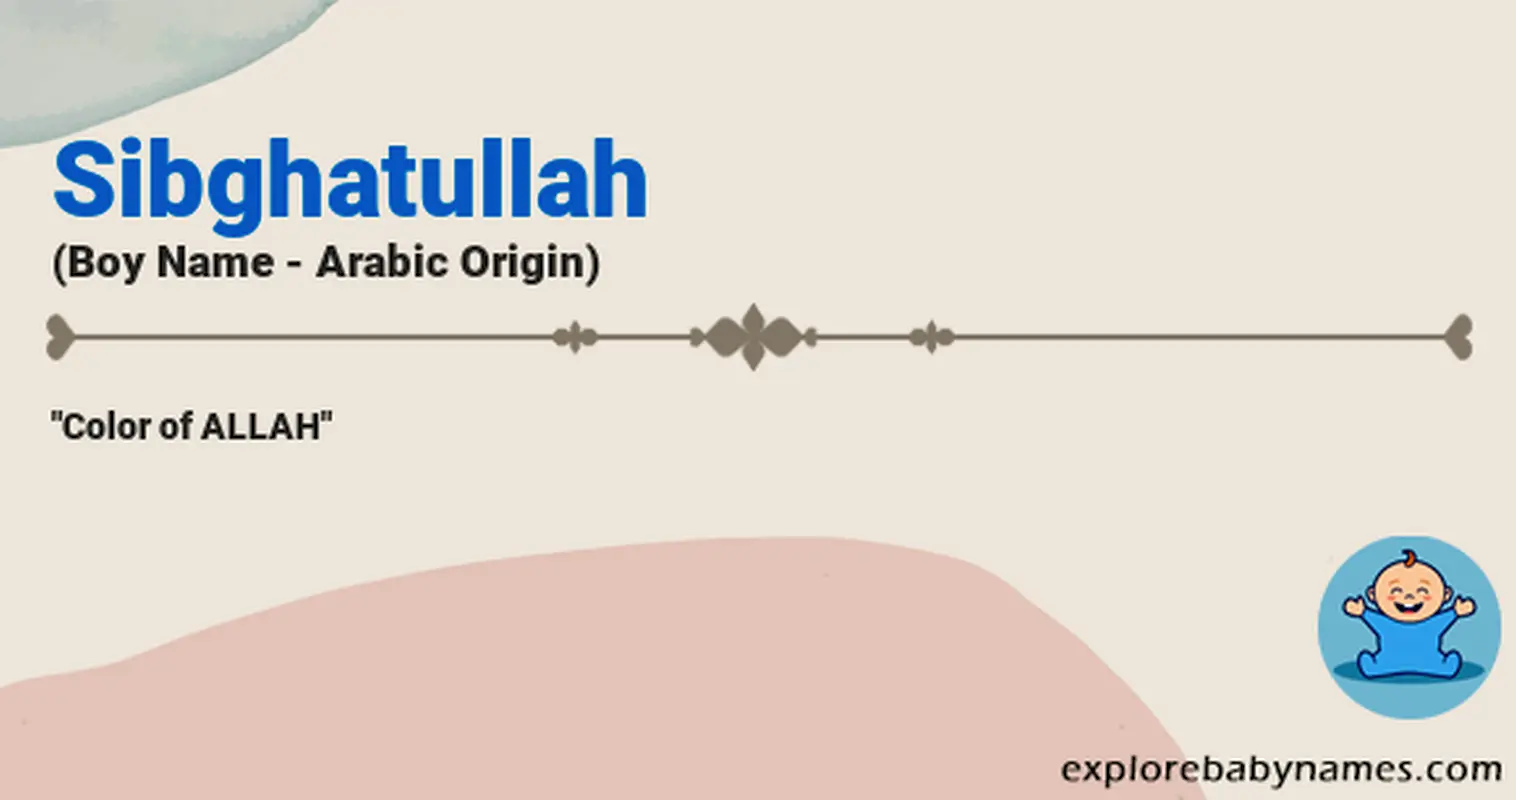 Meaning of Sibghatullah